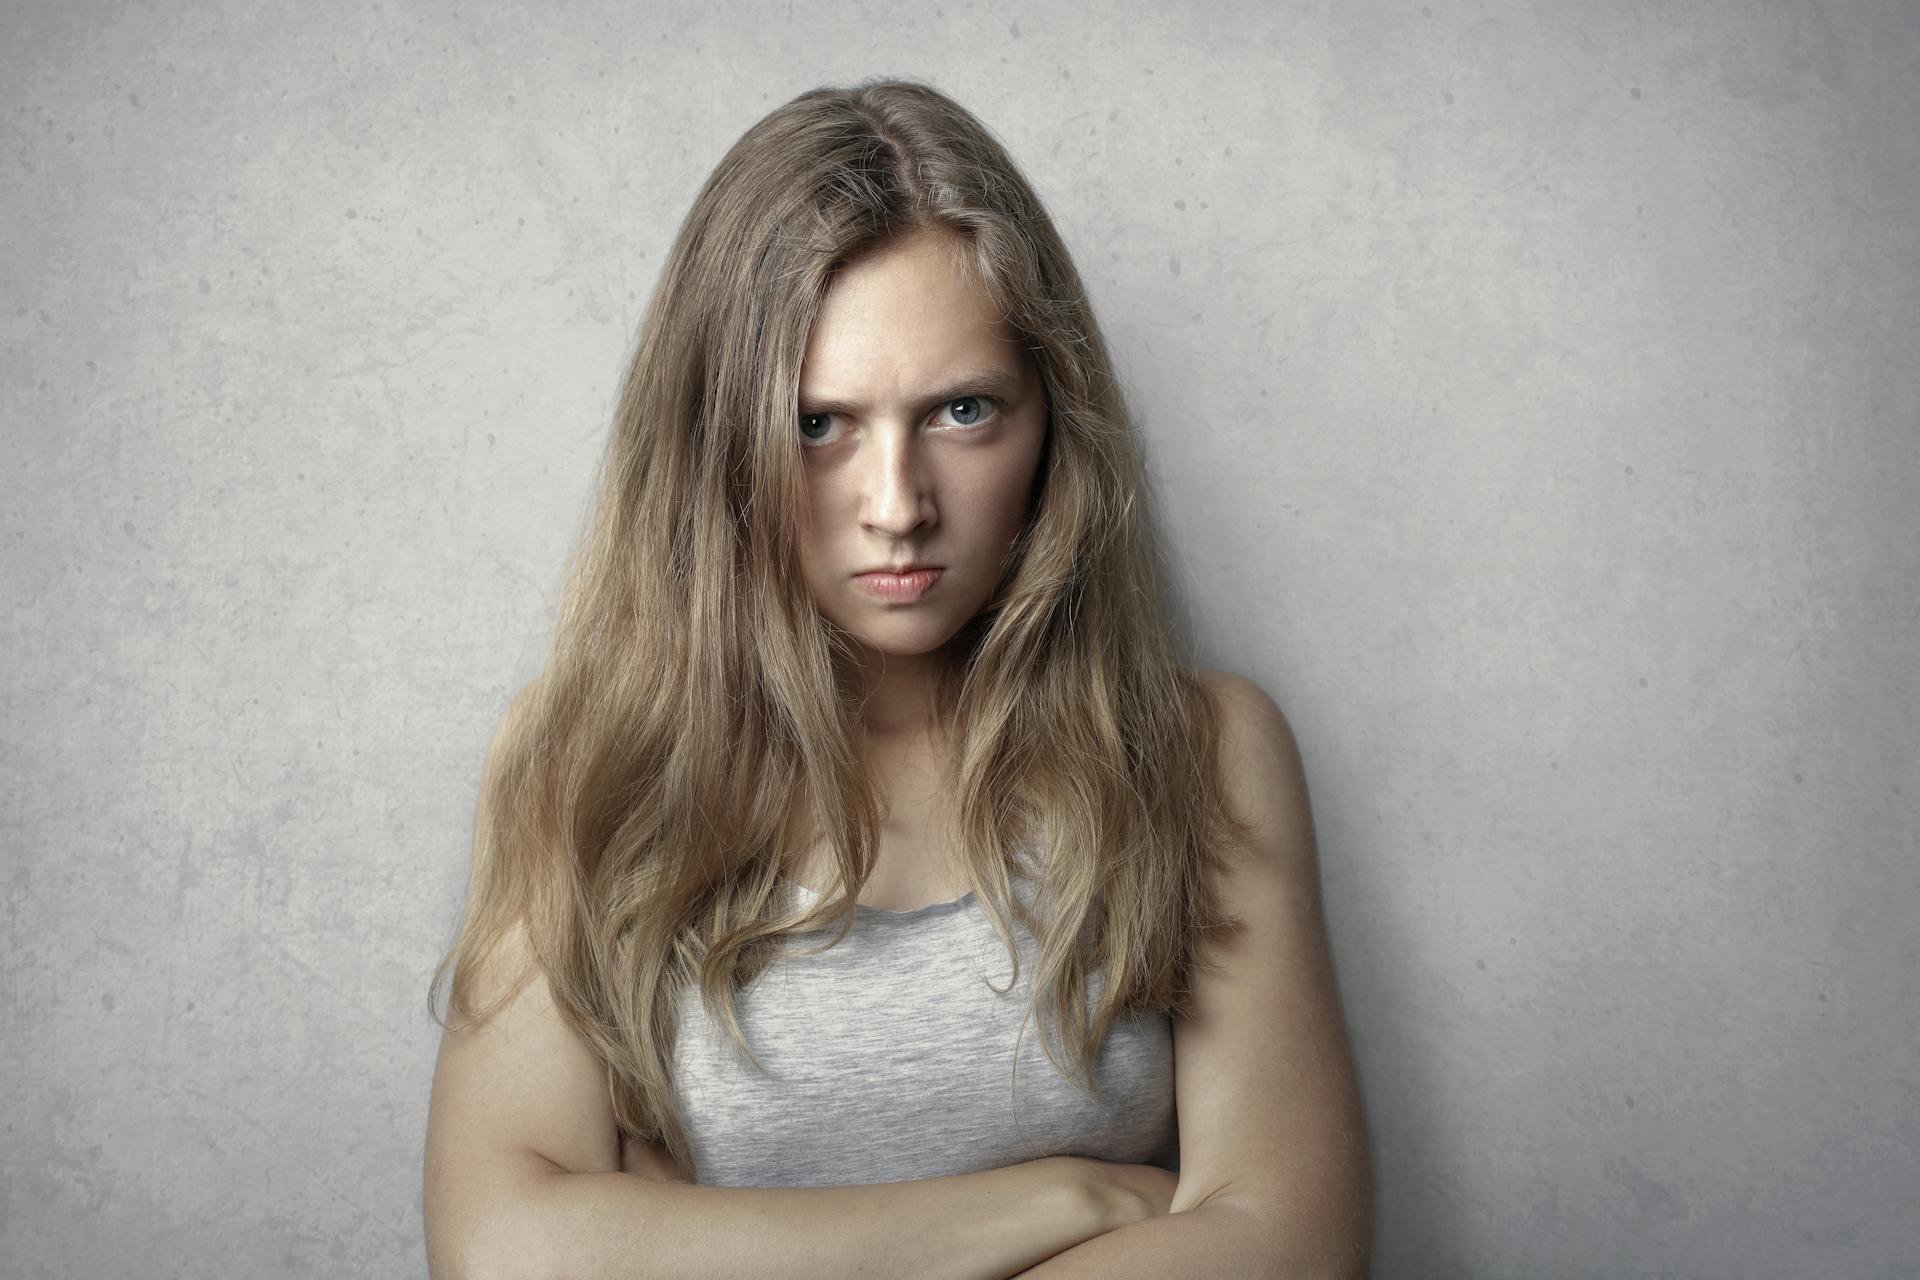 Angry woman with crossed arms | Source: Pexels